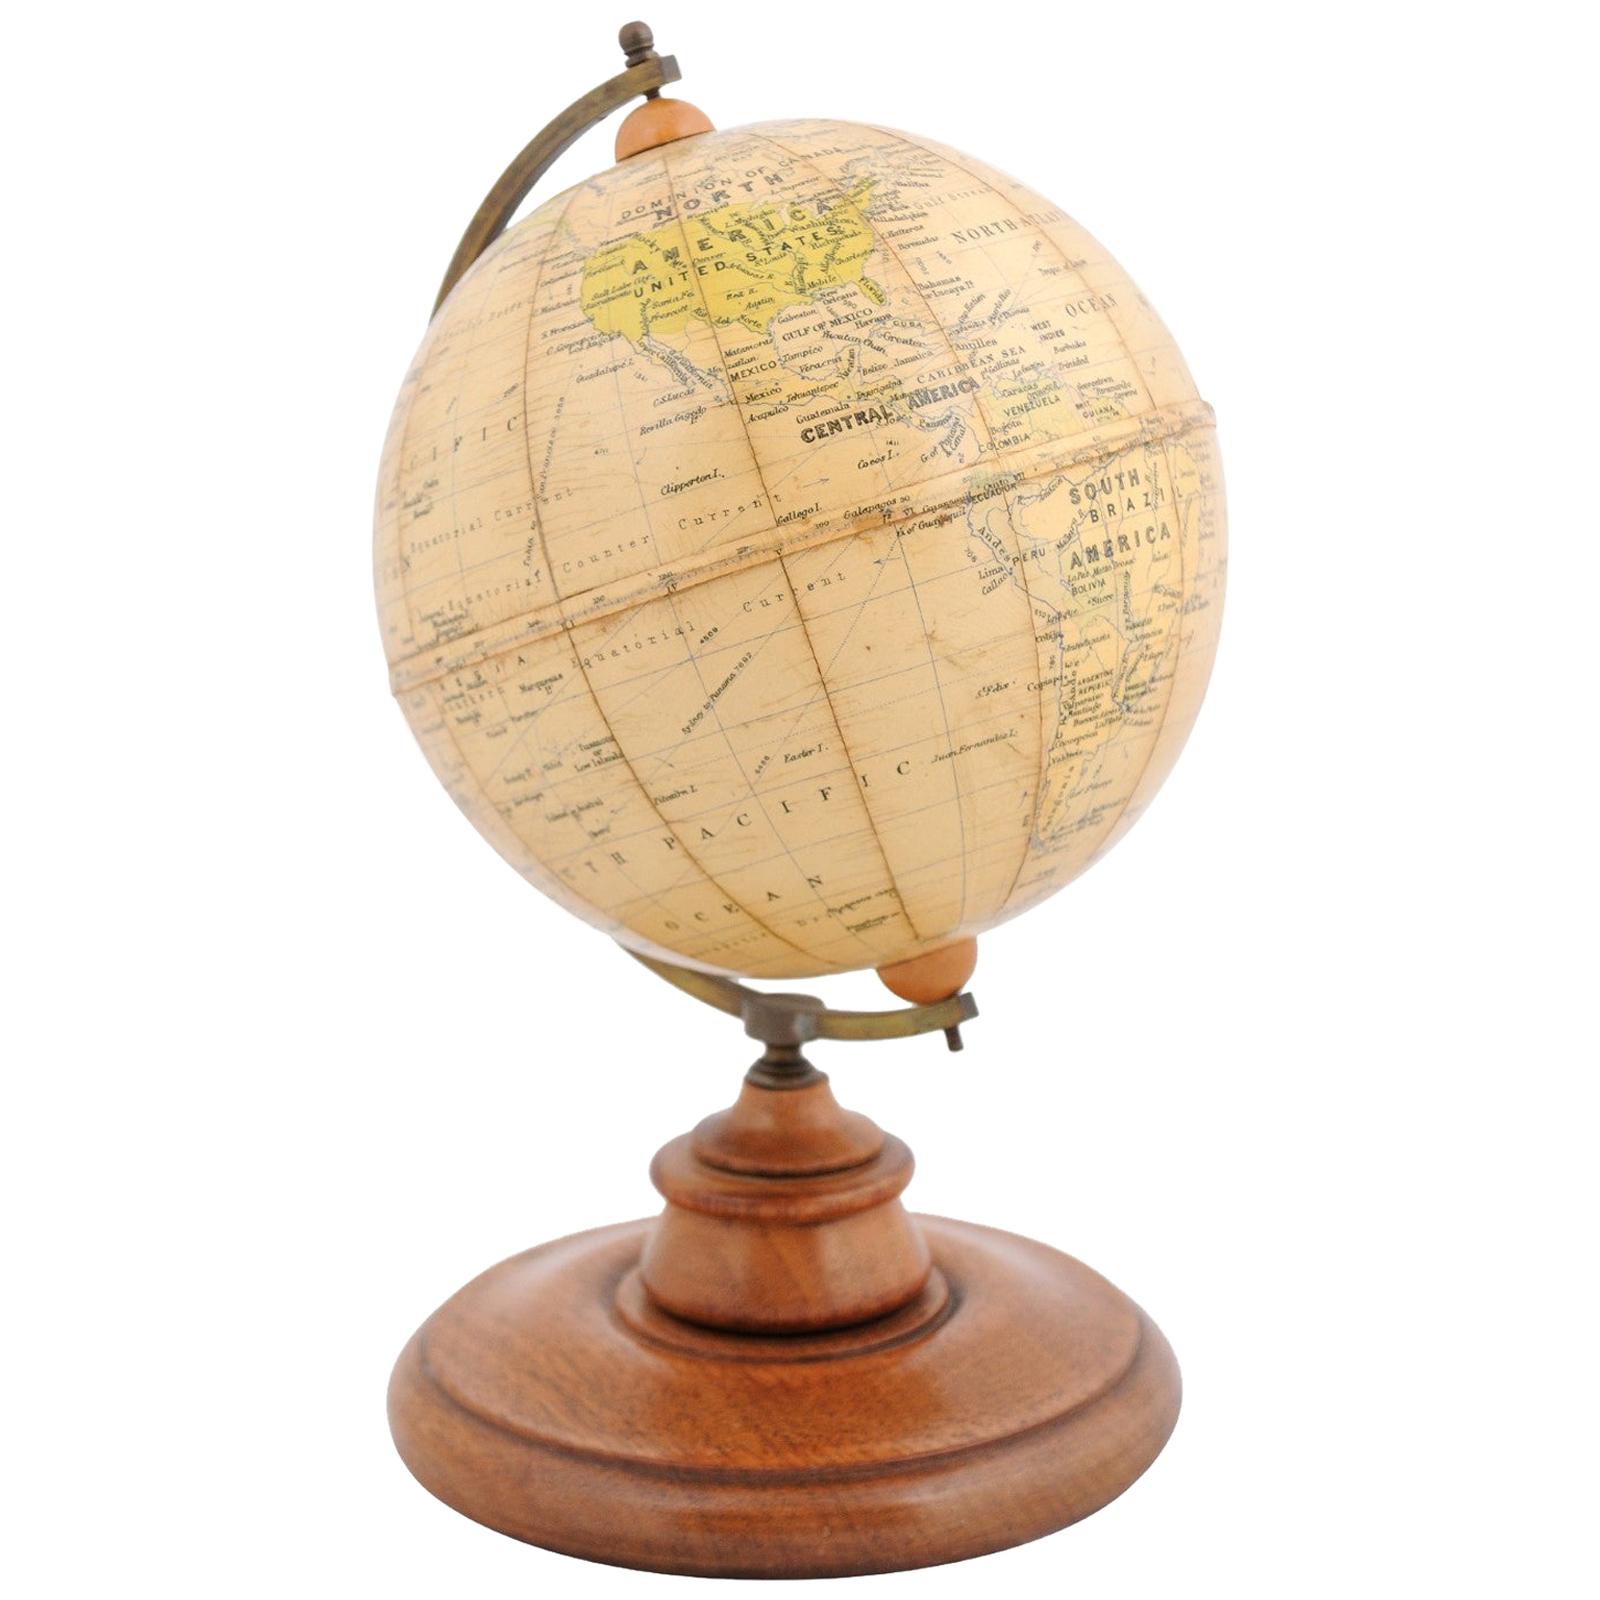 Small English 20th Century George Philip Terrestrial Globe on Wooden Base